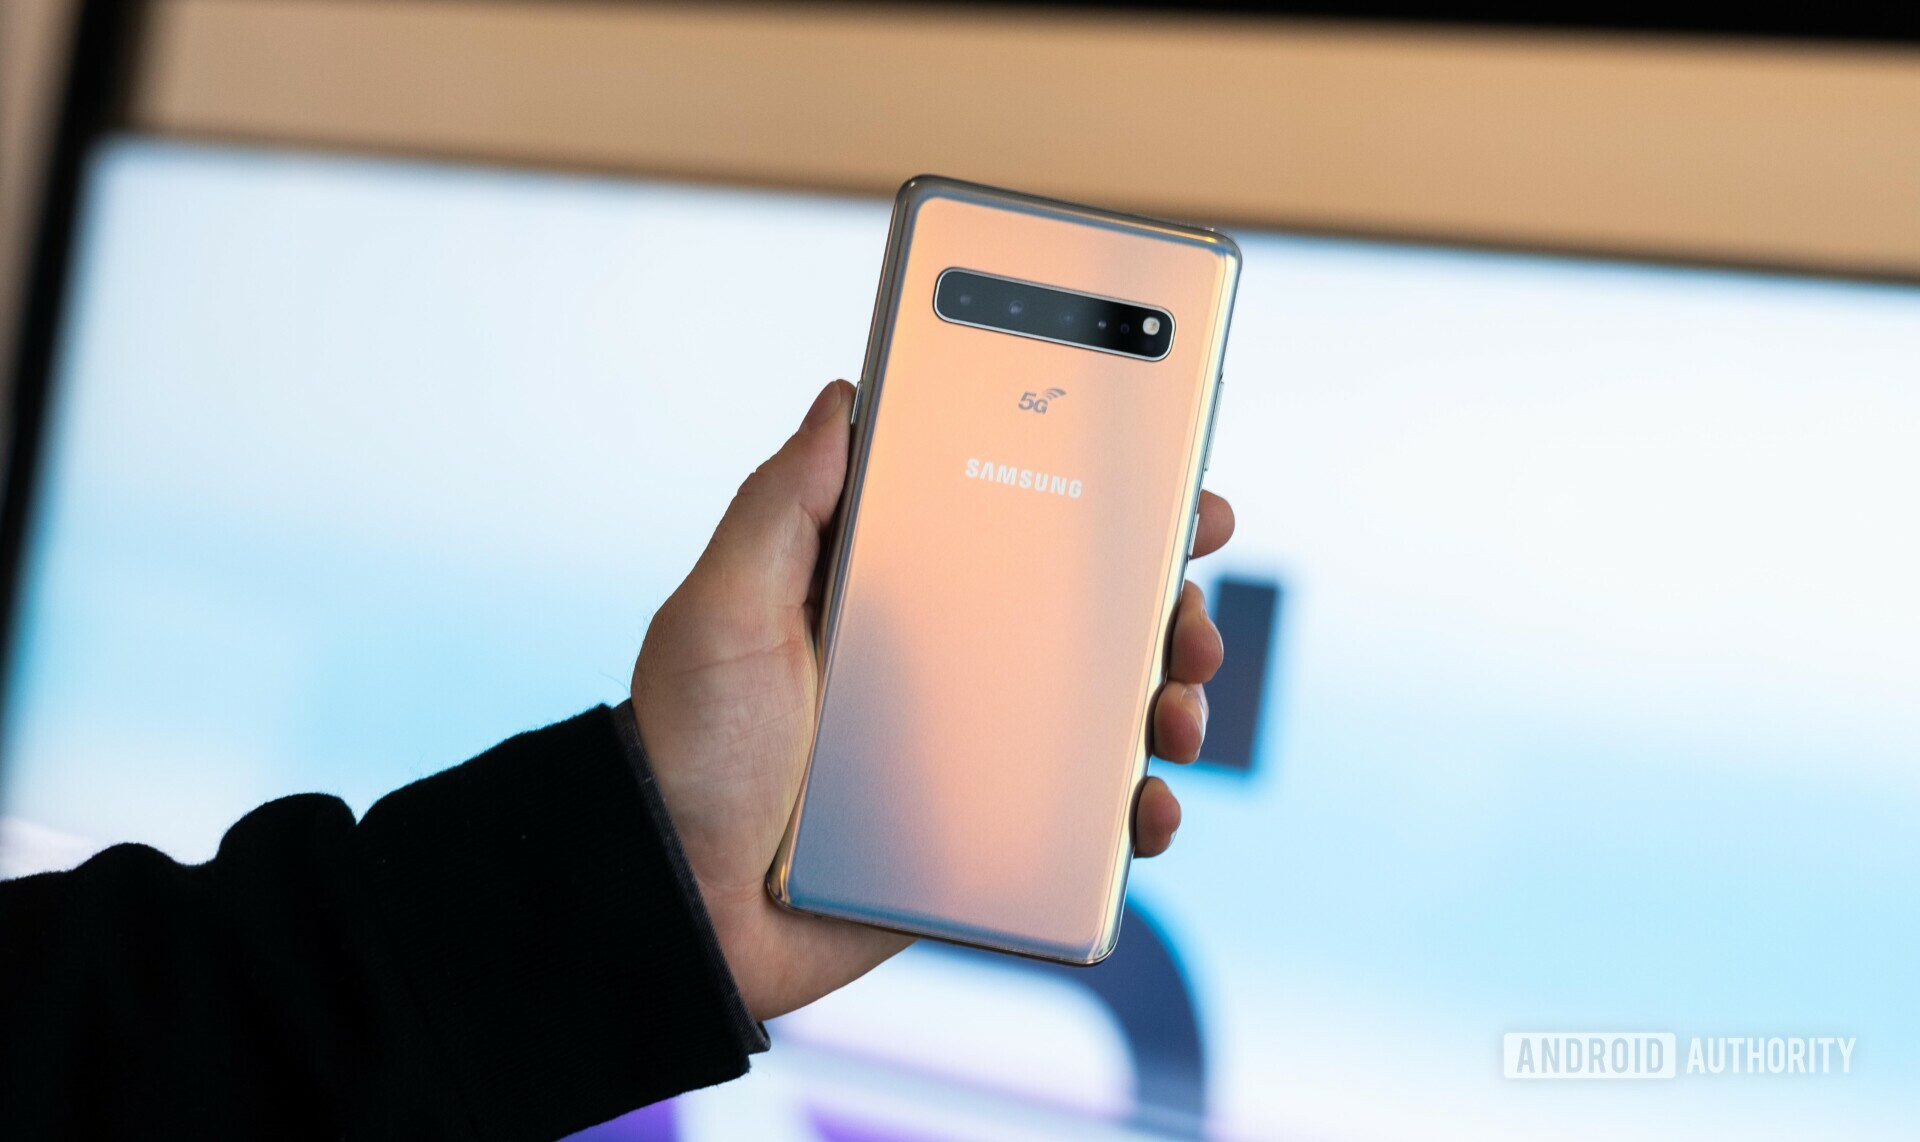 Backside photo of the new Samsung Galaxy S10 5G held in a hand.